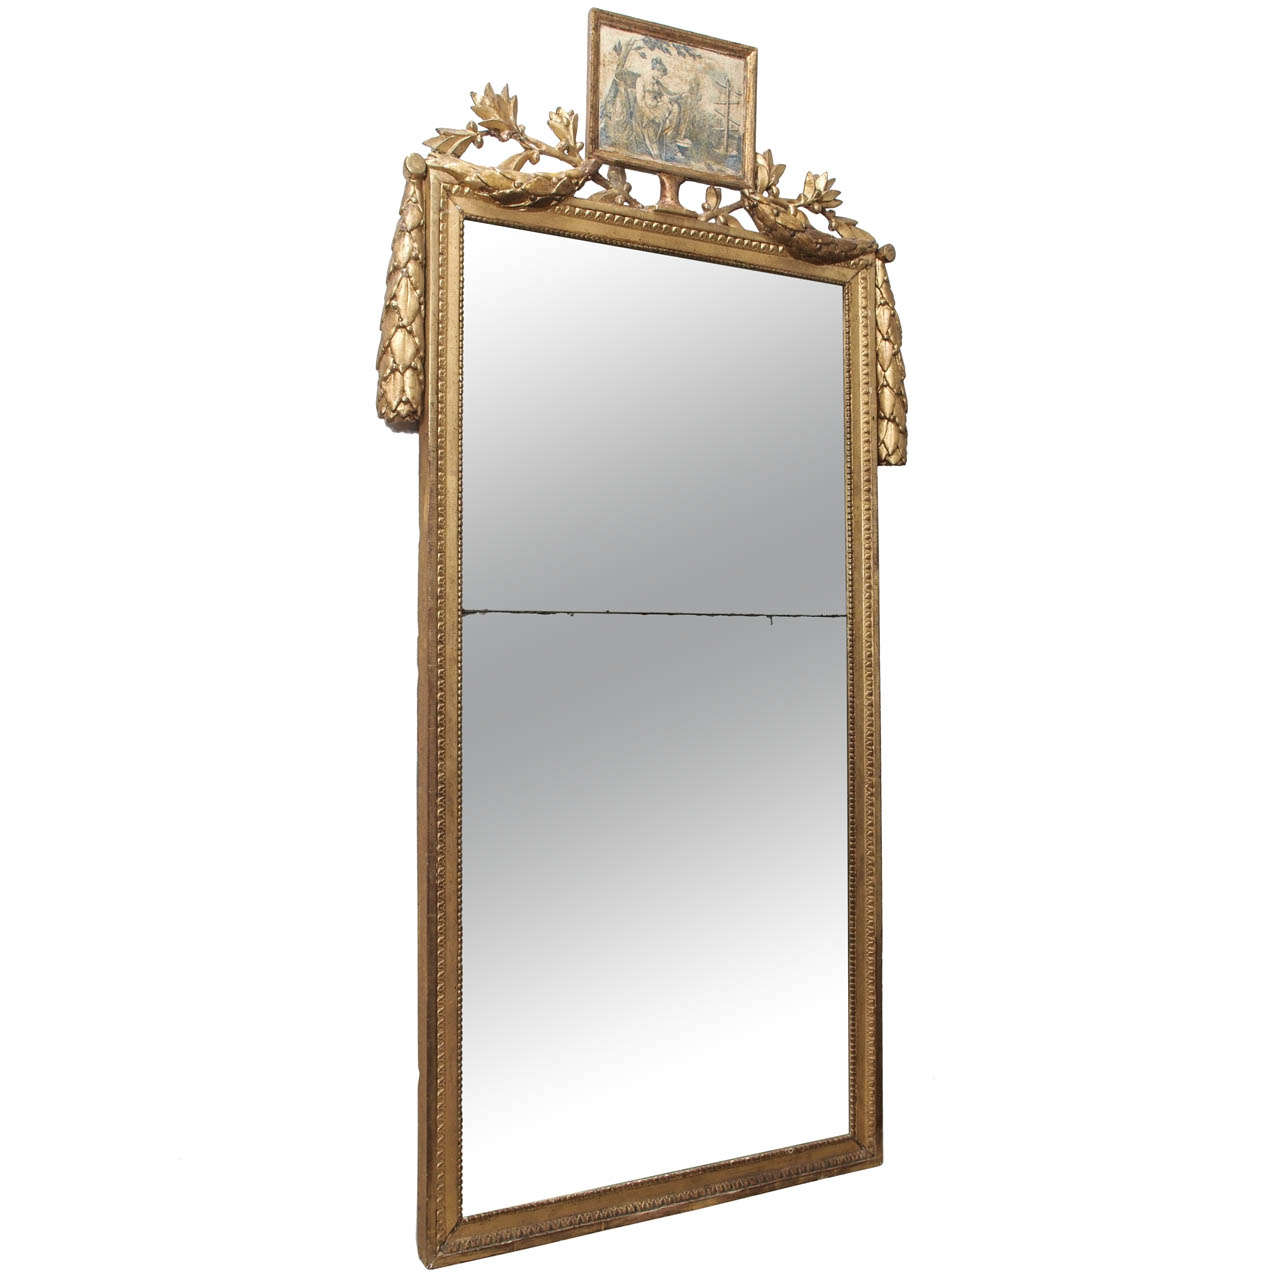 Neoclassical Mirror with a Grisaille Cartouche